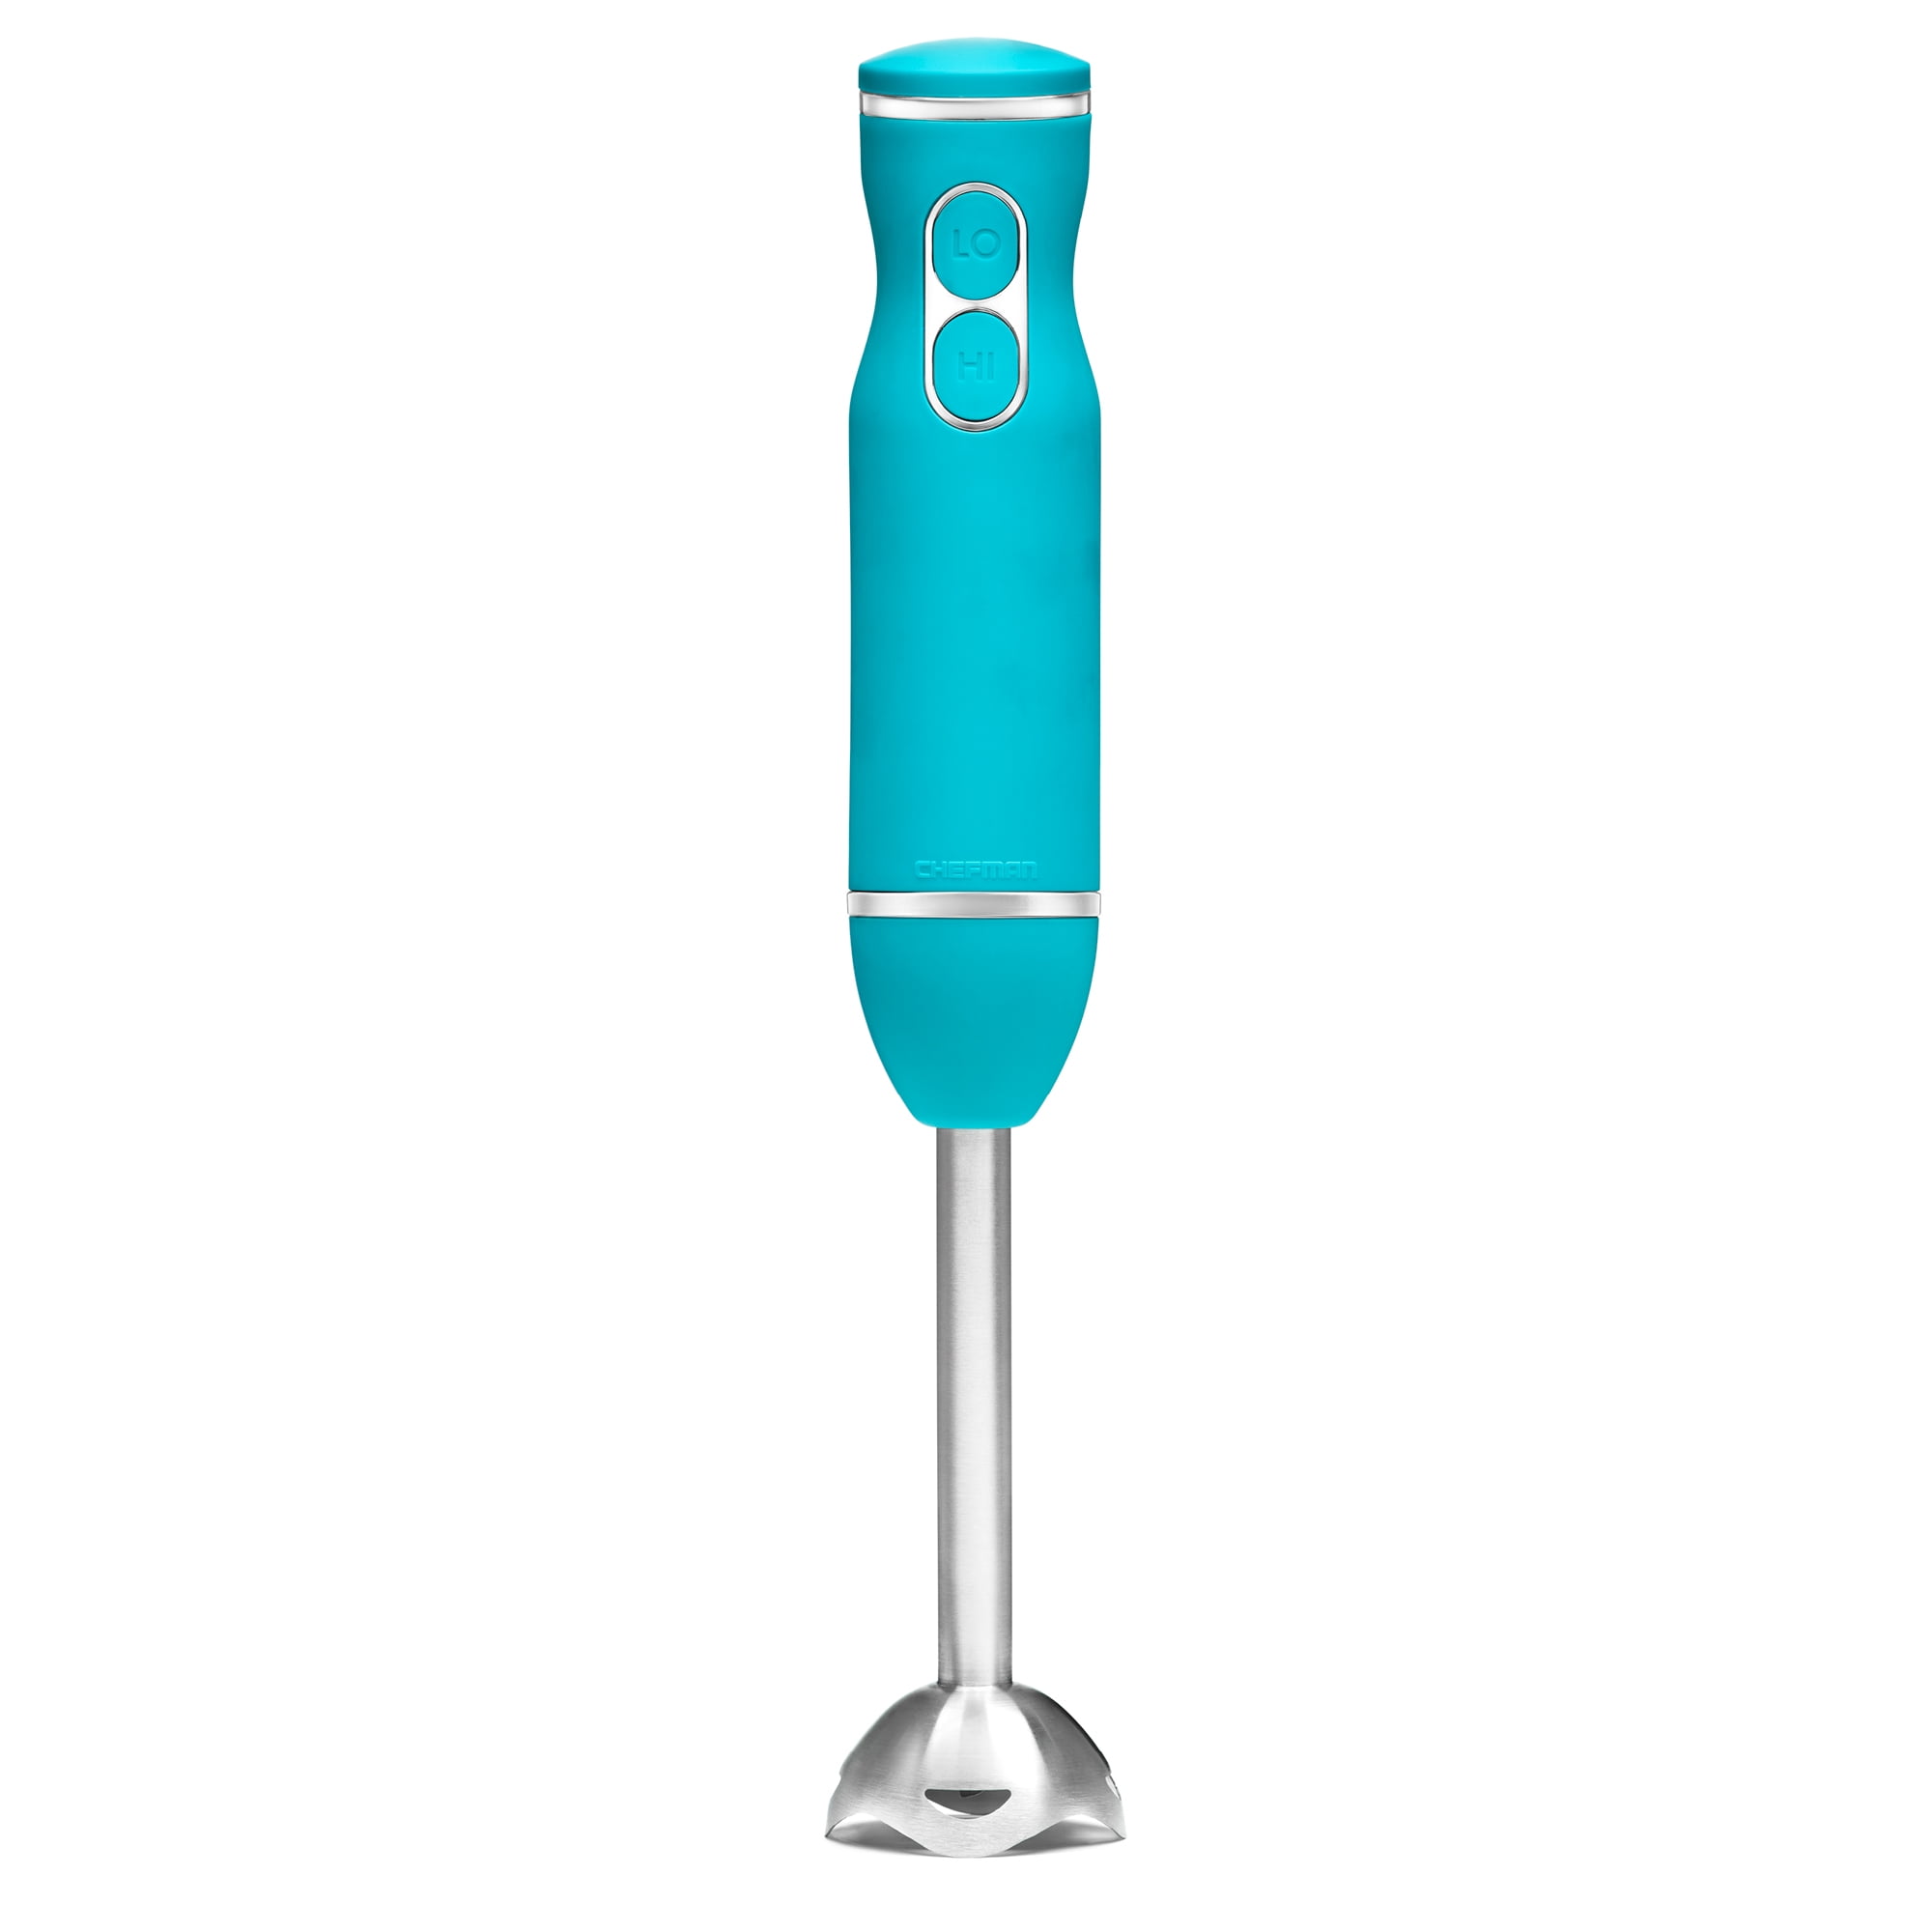  Dash Chef Series Immersion Hand Blender, 5 Speed Stick Blender  with Stainless Steel Blades, Whisk Attachment and Recipe Guide – Teal: Home  & Kitchen